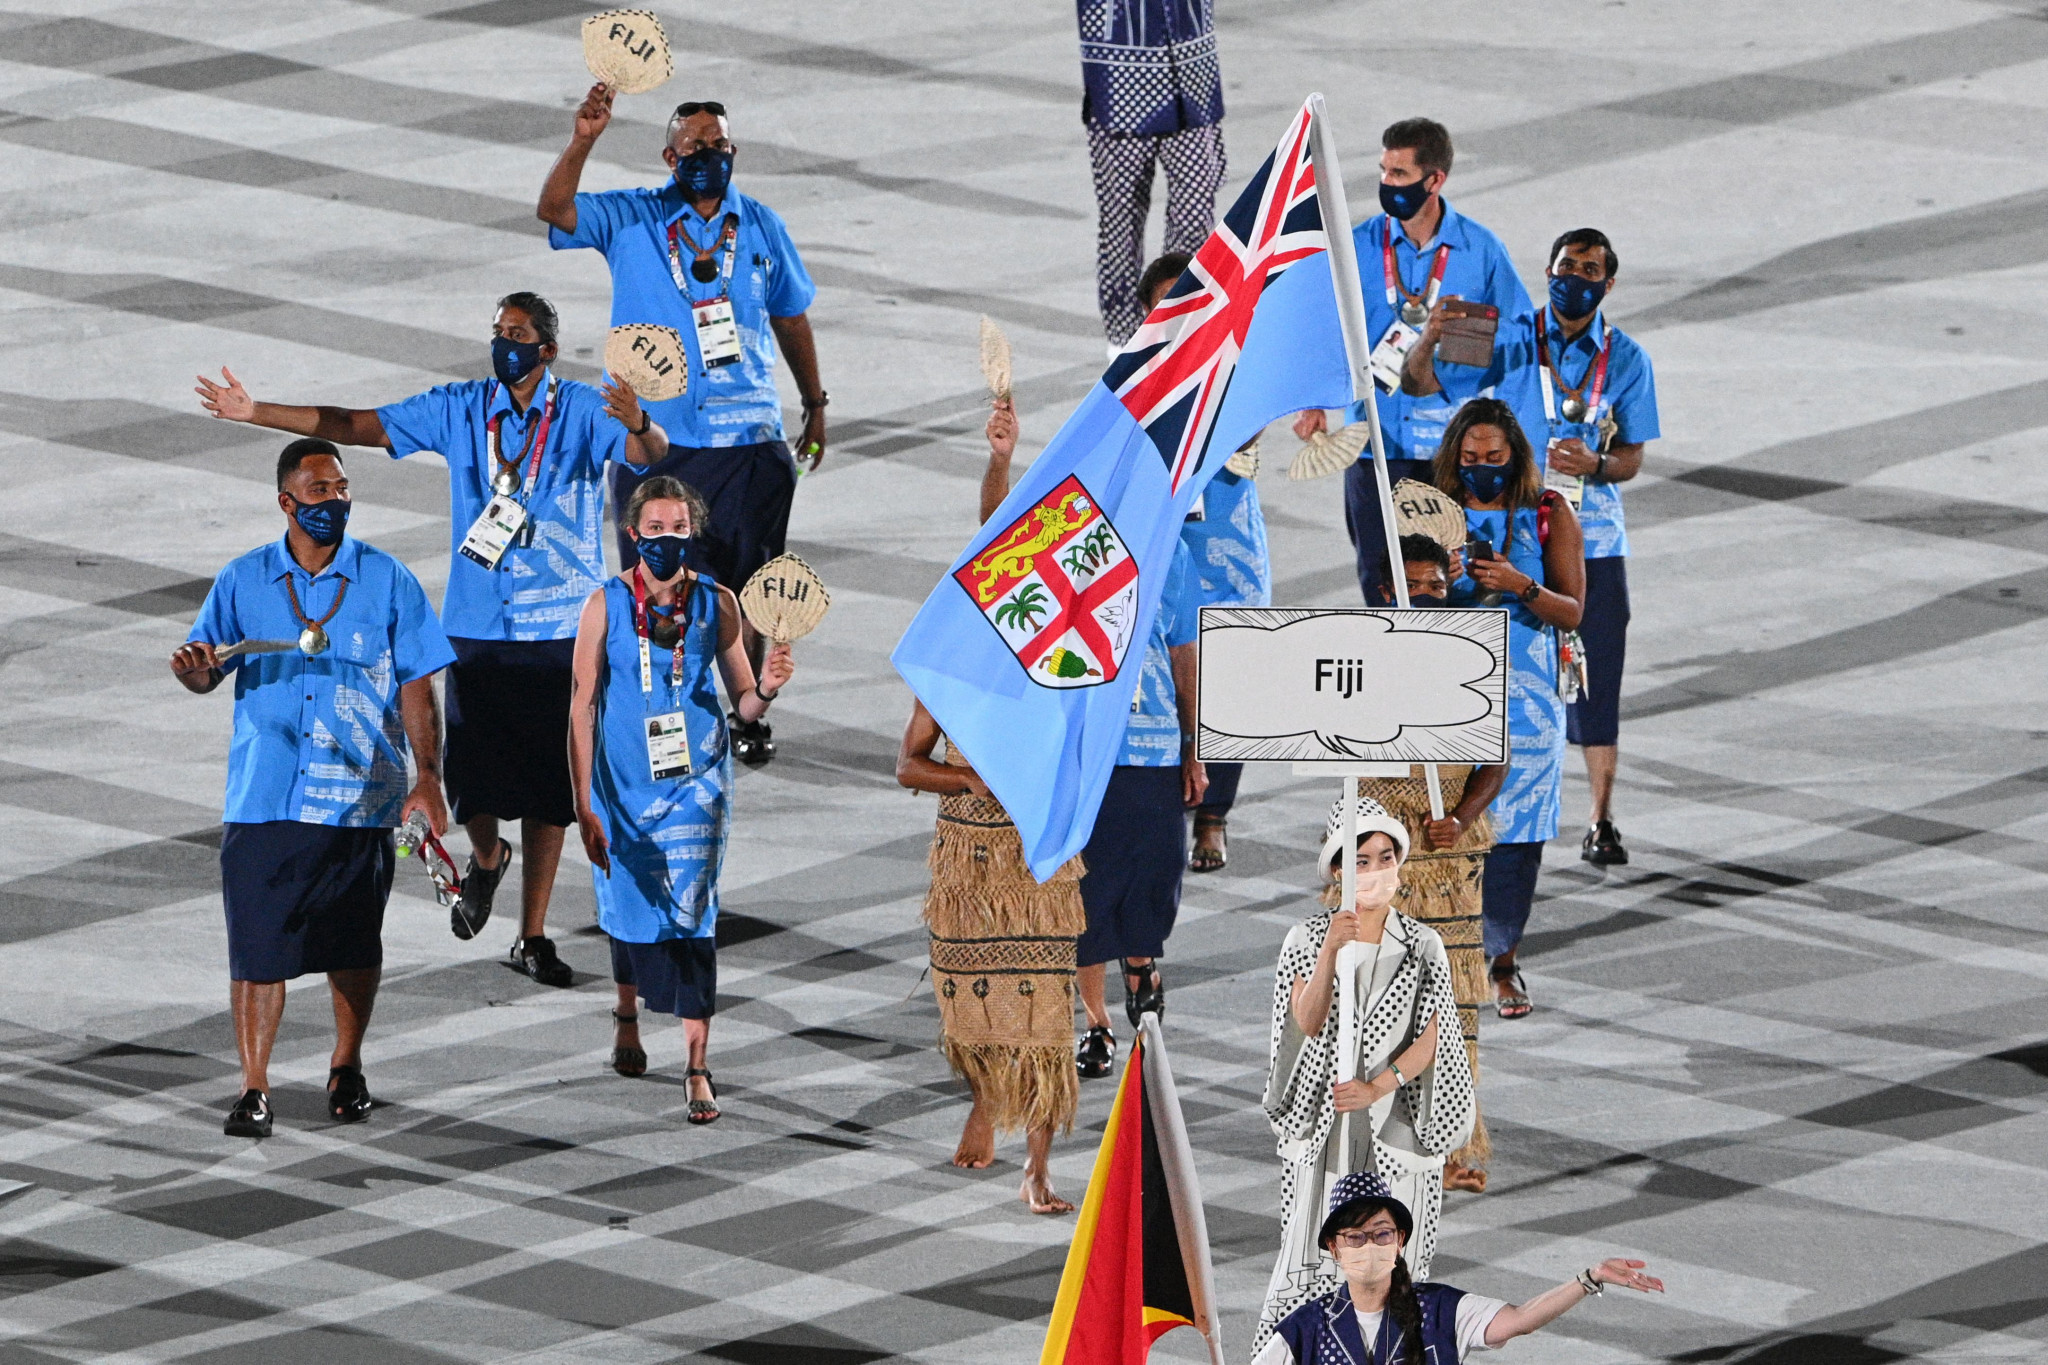 Fiji won one gold and a bronze at the Tokyo 2020 Olympics ©Getty Images